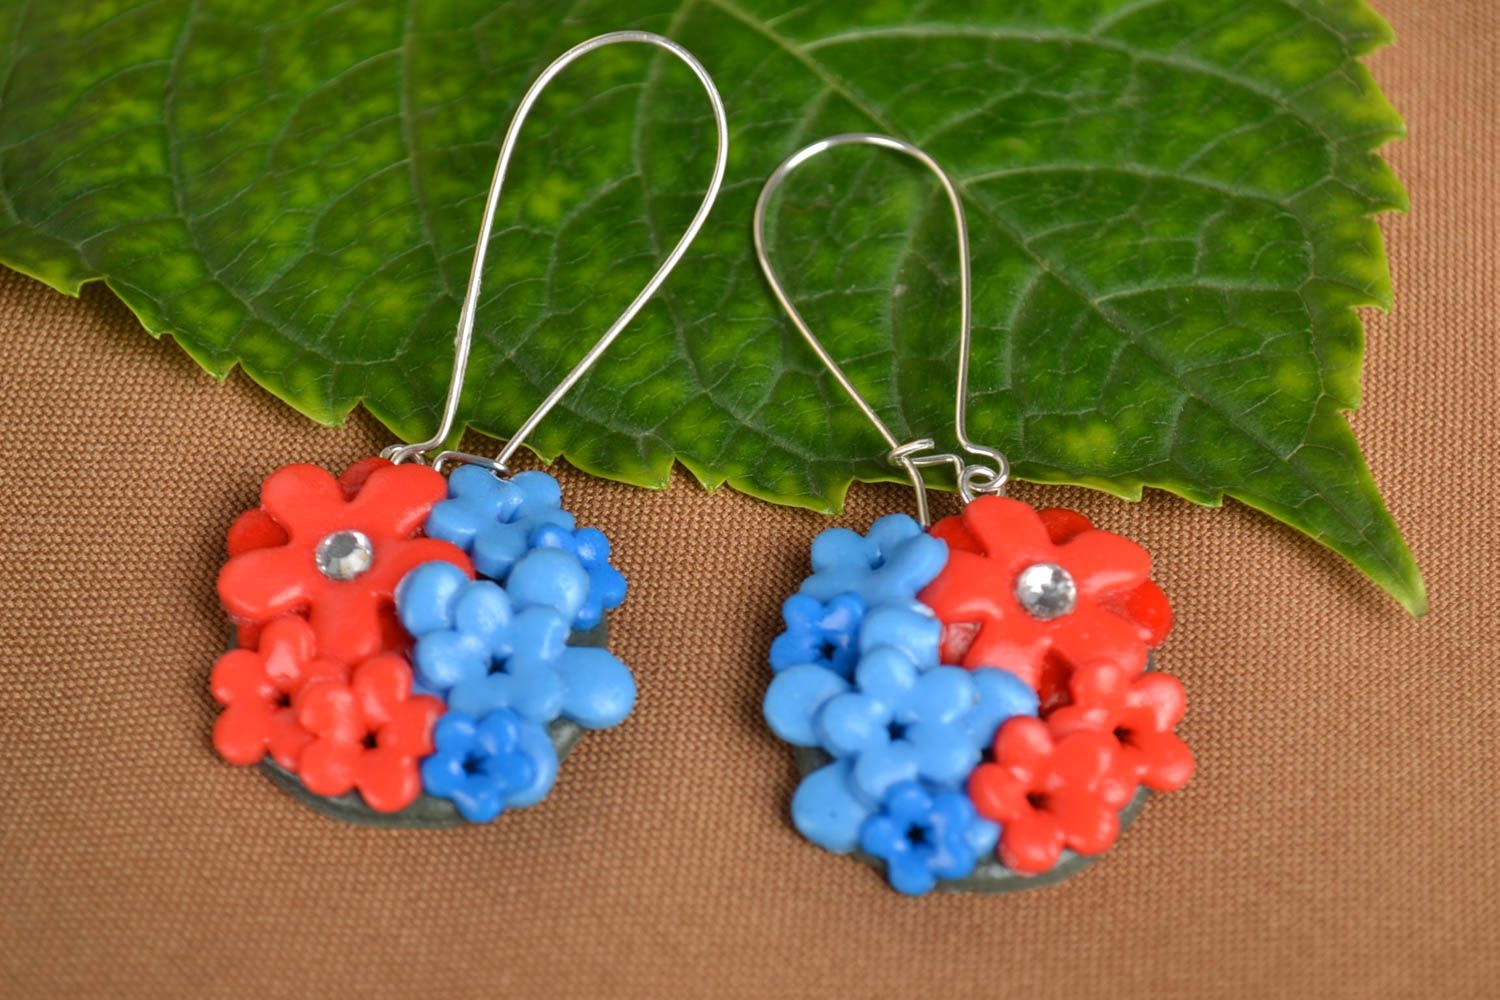 Handmade earrings floral jewelry polymer clay cool earrings gift ideas for girl photo 1